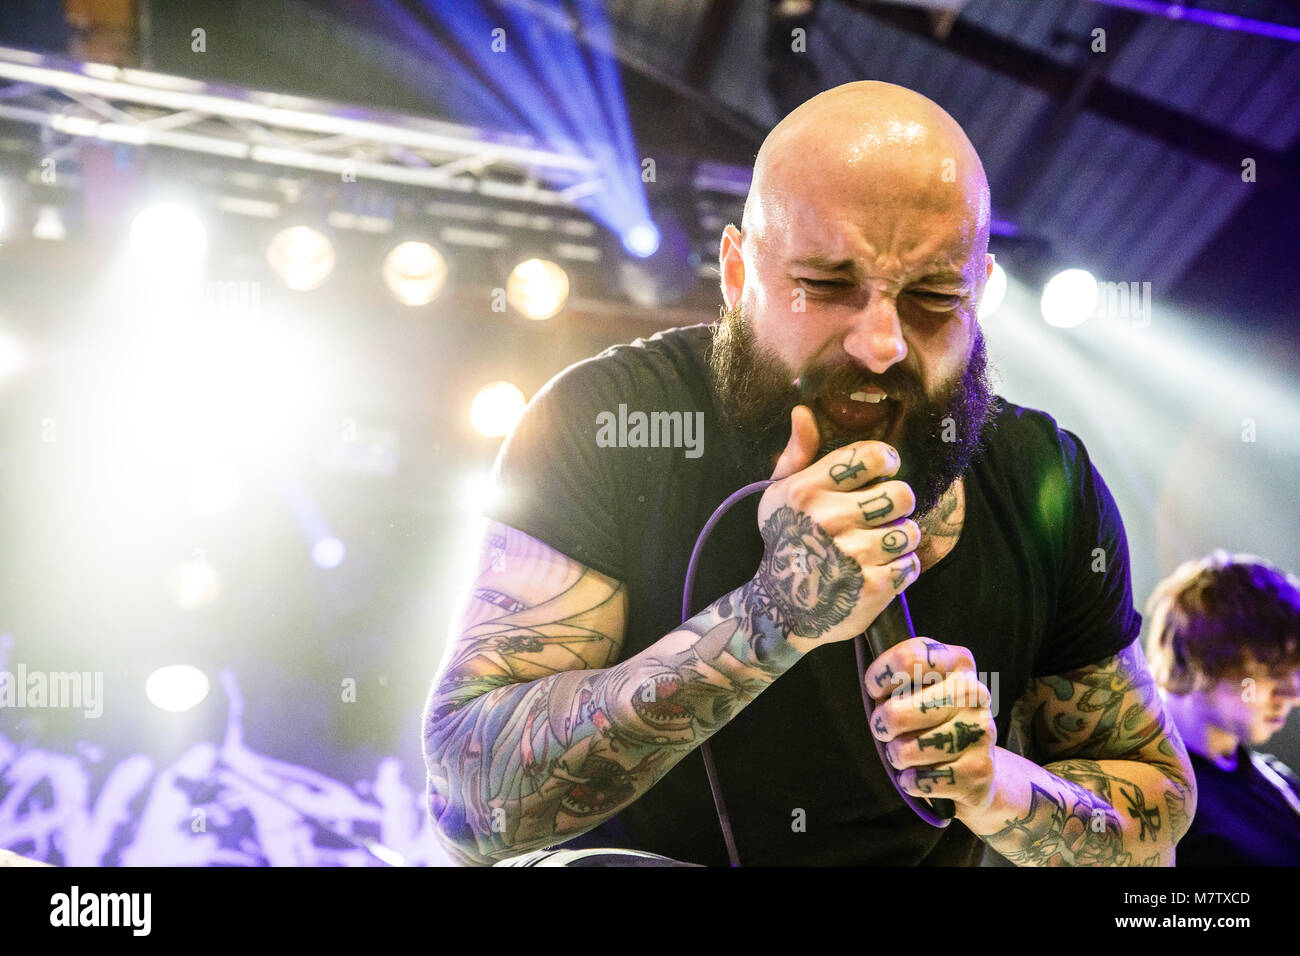 Denmark, Copenhagen - March 12, 2018. The American Christian band August Burns Red performs a live concert at Pumpehuset in Copenhagen. Here vocalist Jake Luhrs is seen on stage.